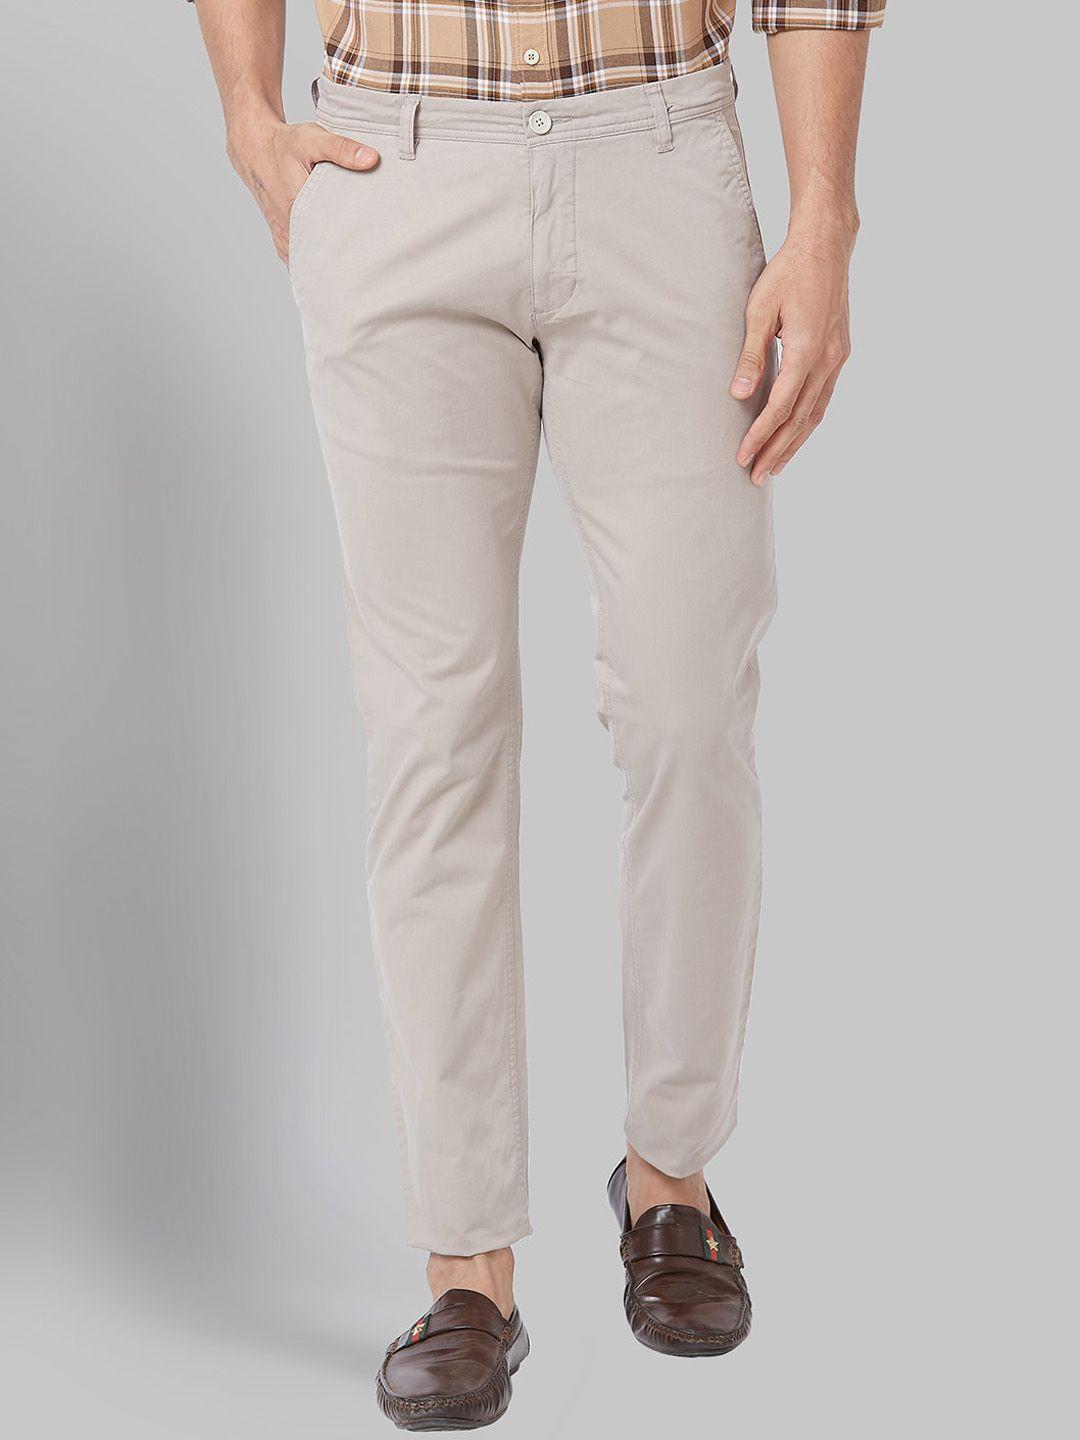 parx-men-tapered-fit-low-rise-trousers